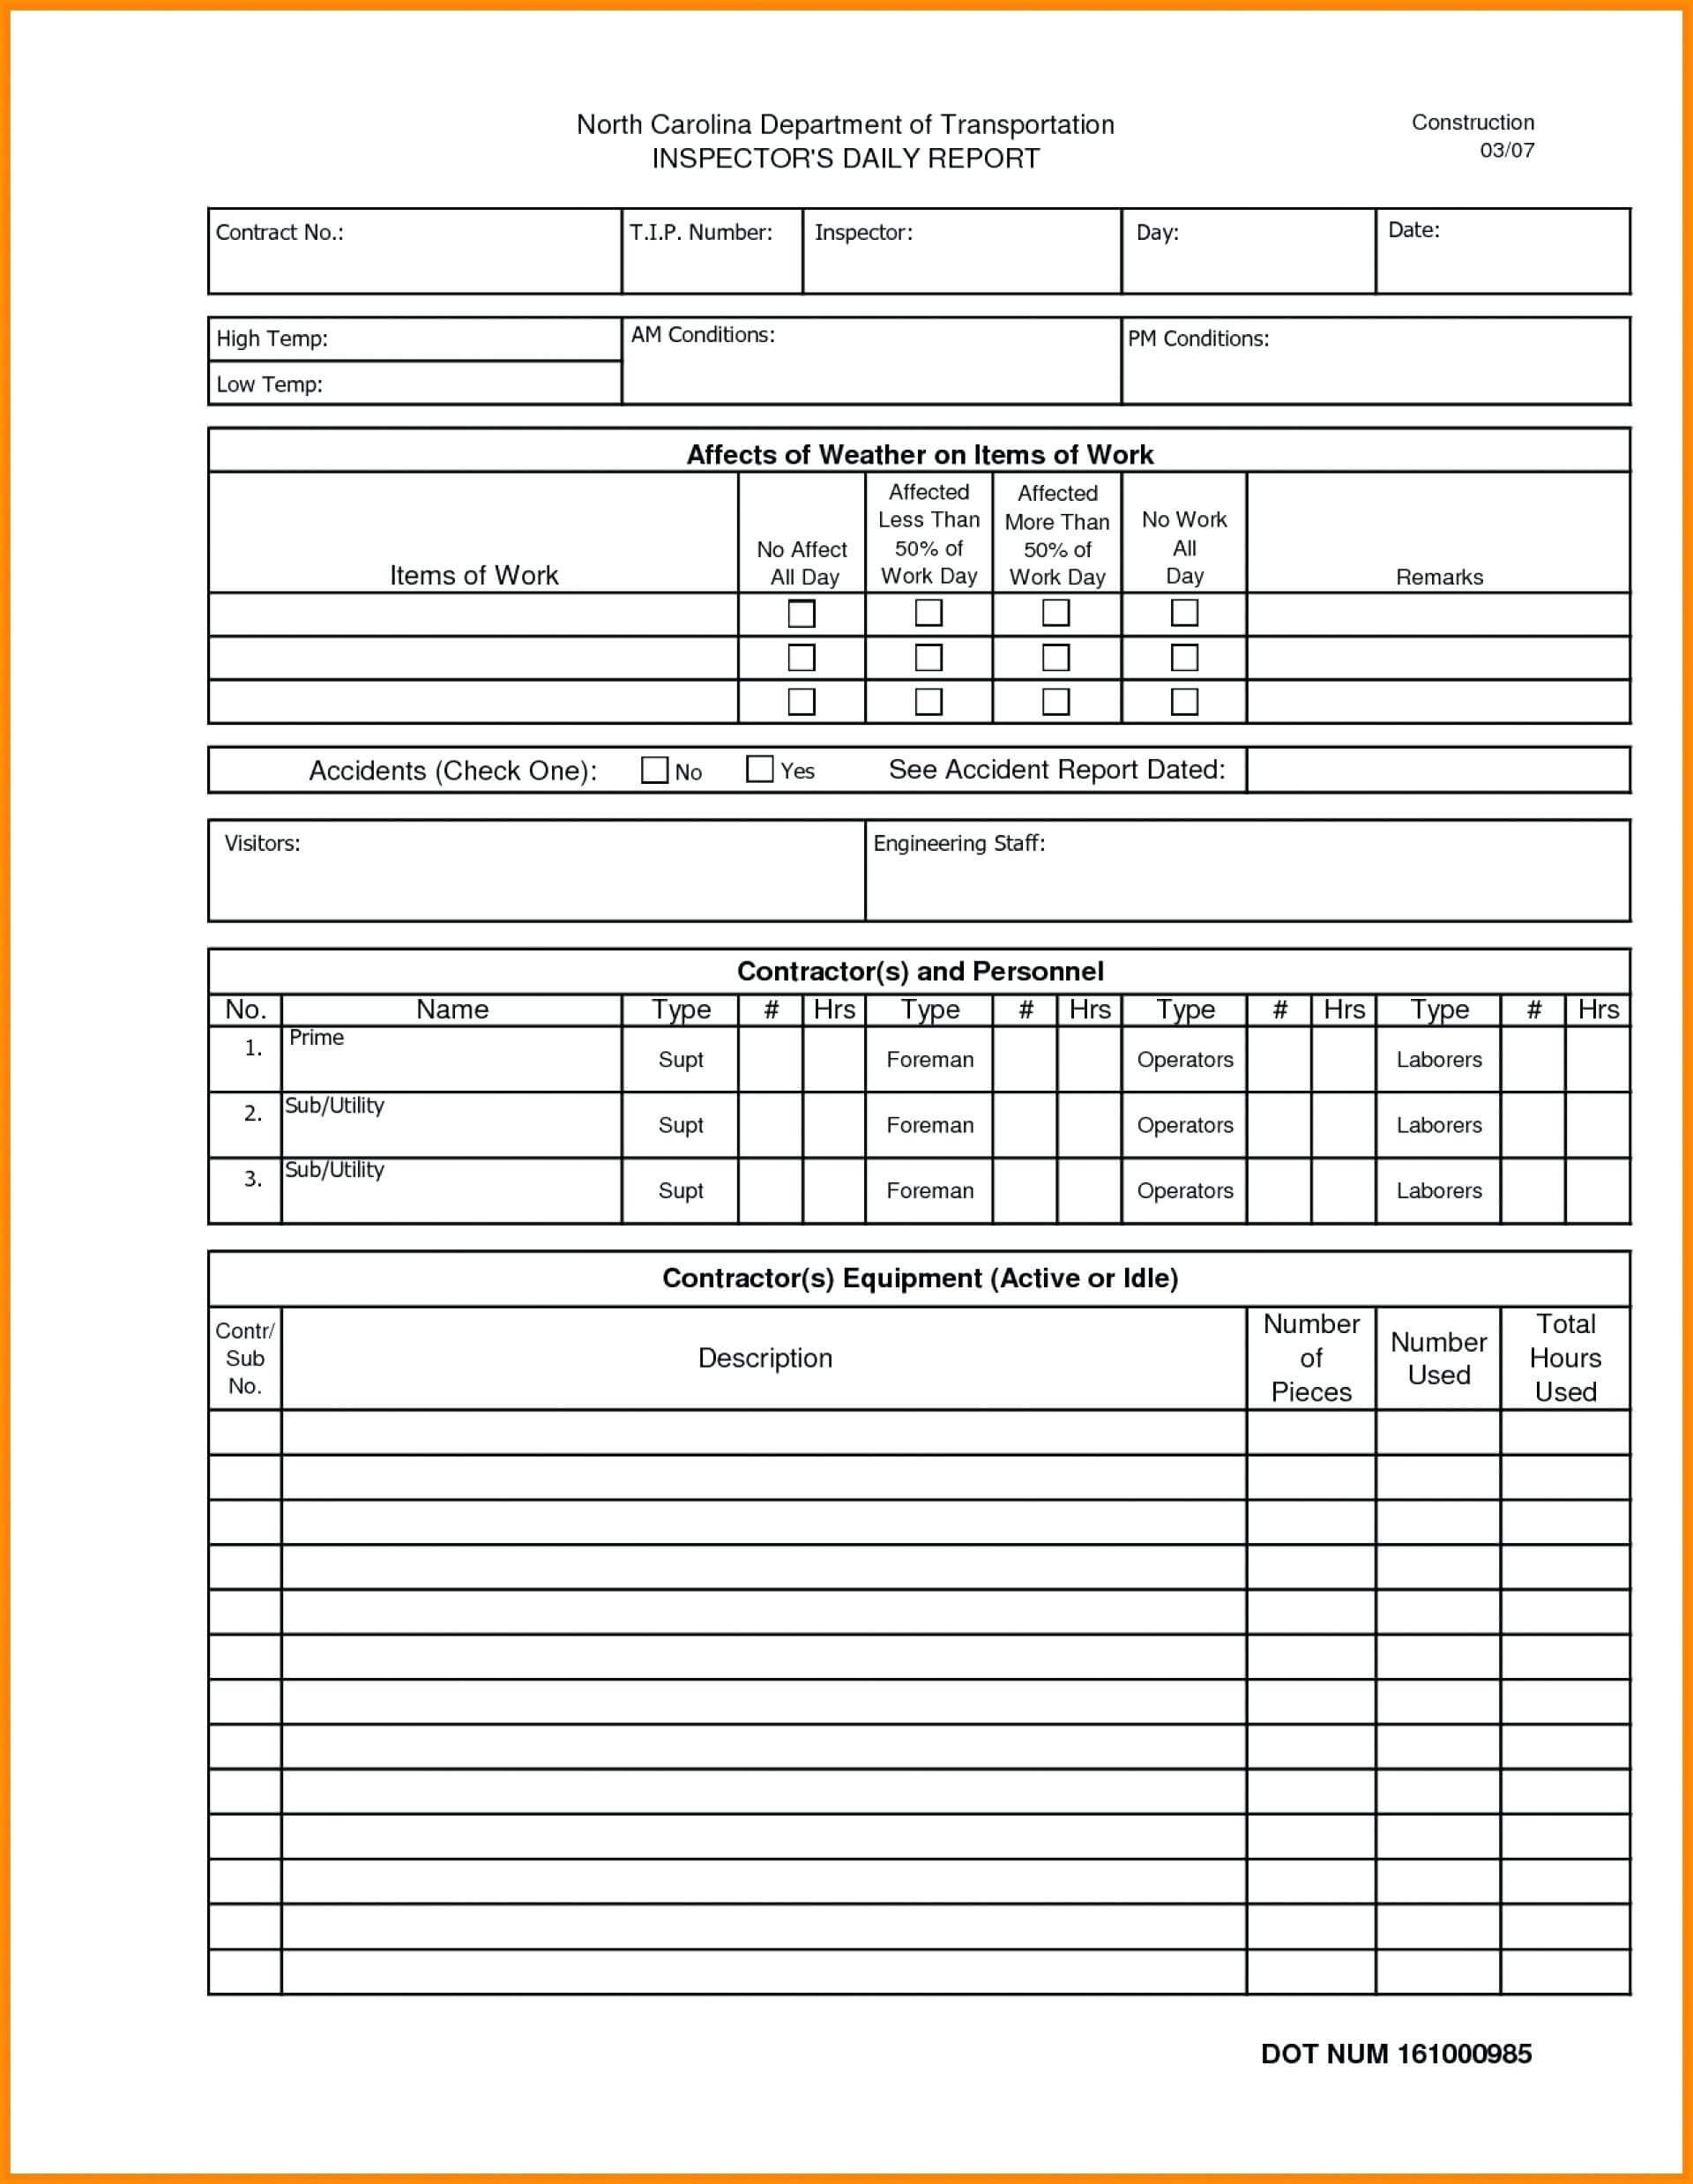 027 Construction Cost Report Template Excel Of Beautiful Intended For Construction Cost Report Template